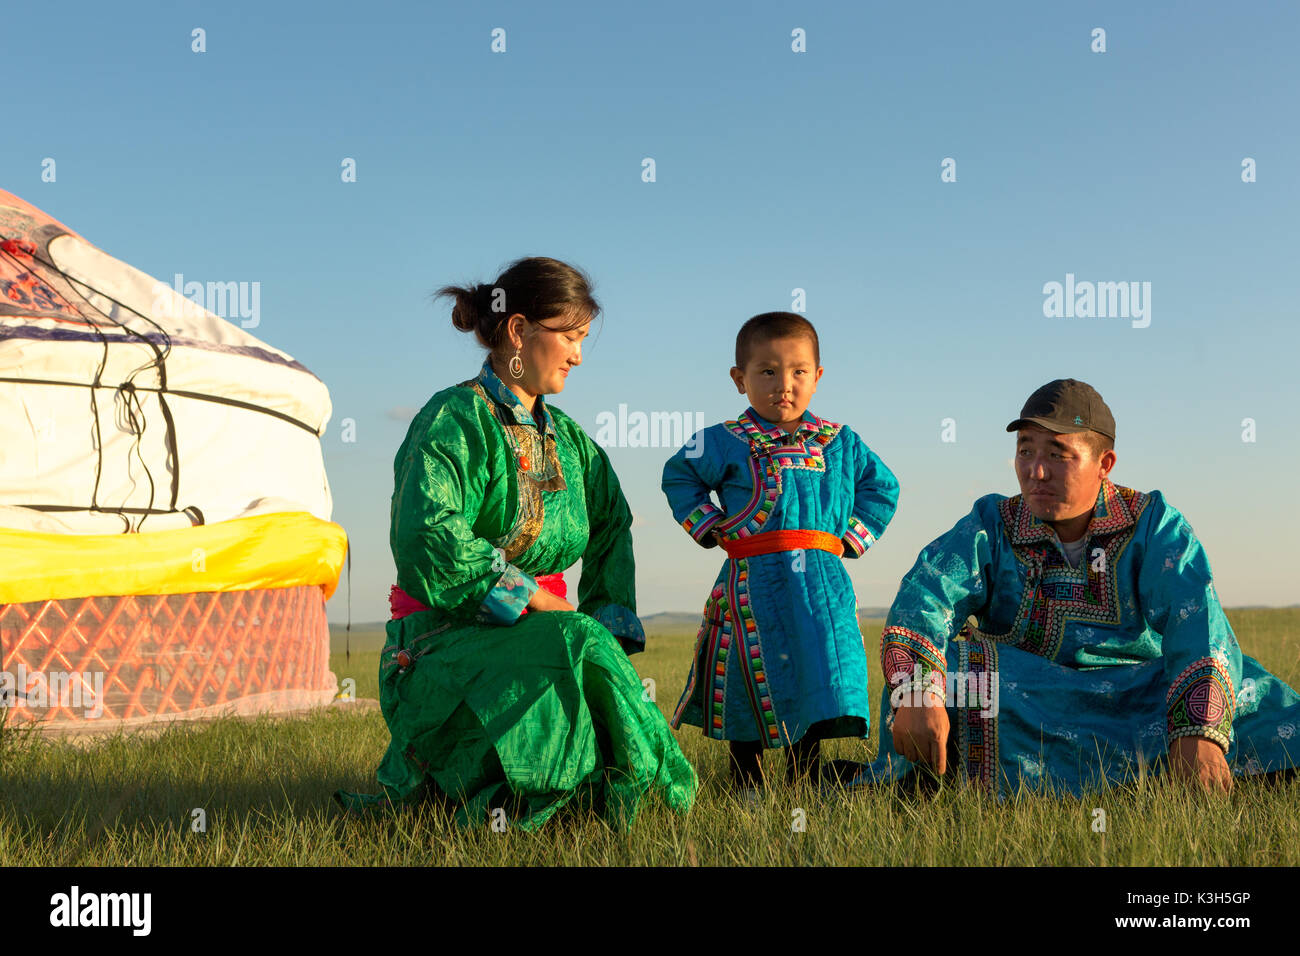 Inner Mongolia, China-July 30, 2017: Nomadic Mongolian family with their traditional colorful dresses near their yurt in immense grassland of the coun Stock Photo